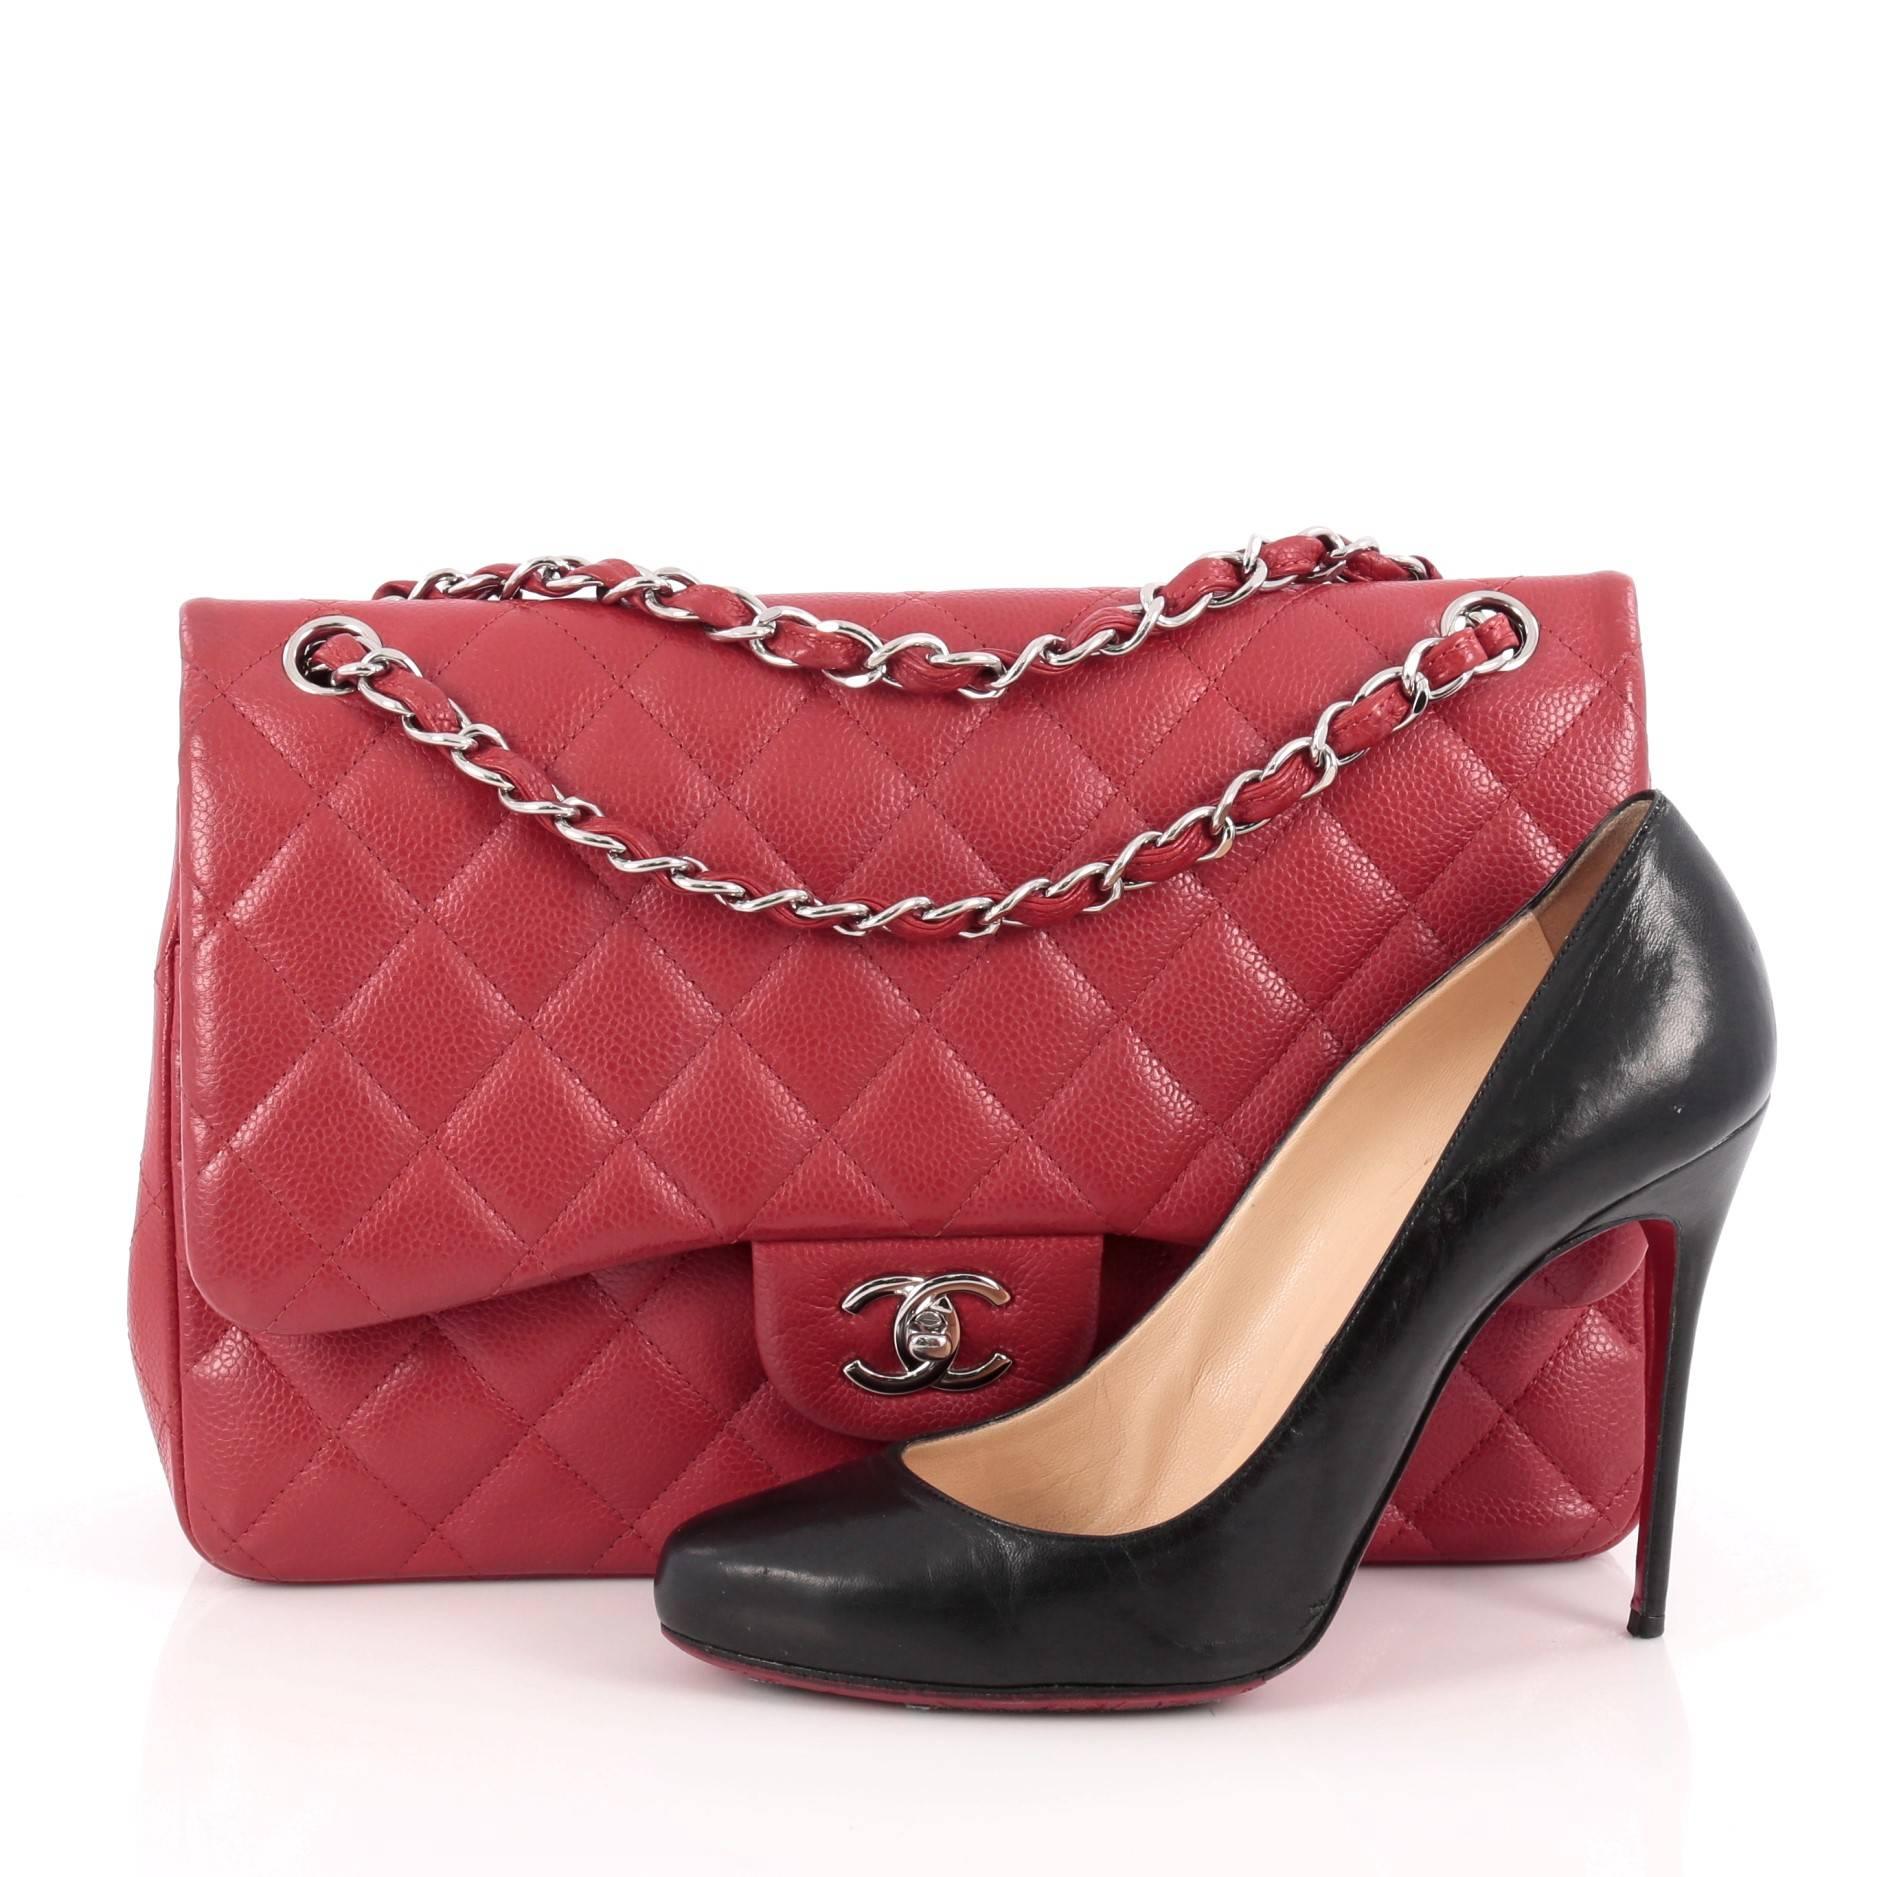 This authentic Chanel Classic Double Flap Bag Quilted Caviar Jumbo is one of the brand's most popular style. Crafted from red caviar leather, this elegant flap features Chanel's signature diamond quilted design, woven-in leather chain straps,